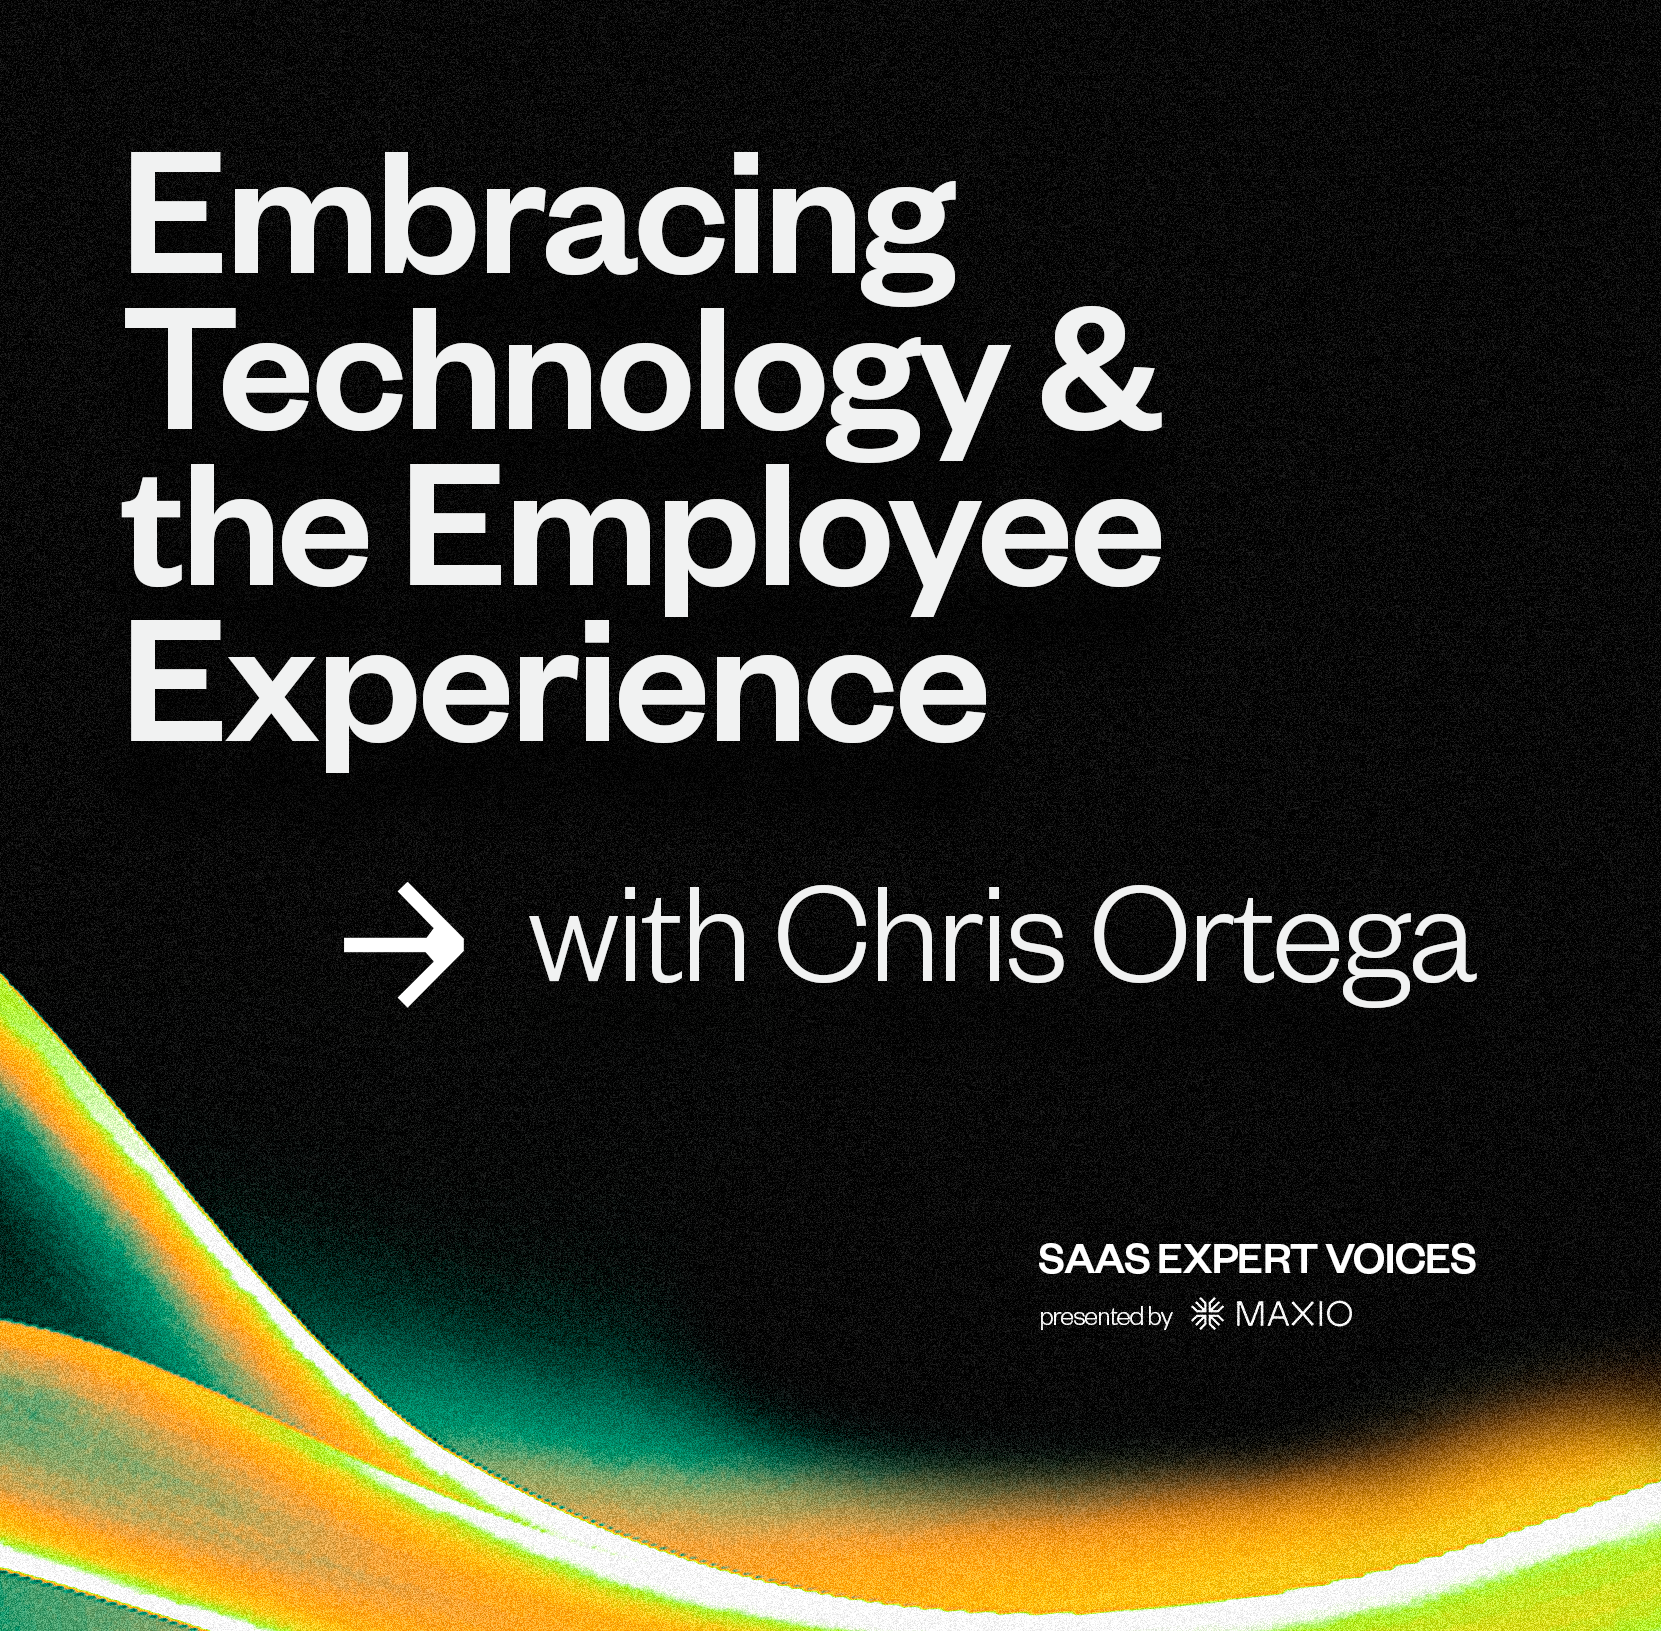 An image with this episode's title: Embracing Technology and the Employee Experience, with Chris Ortega